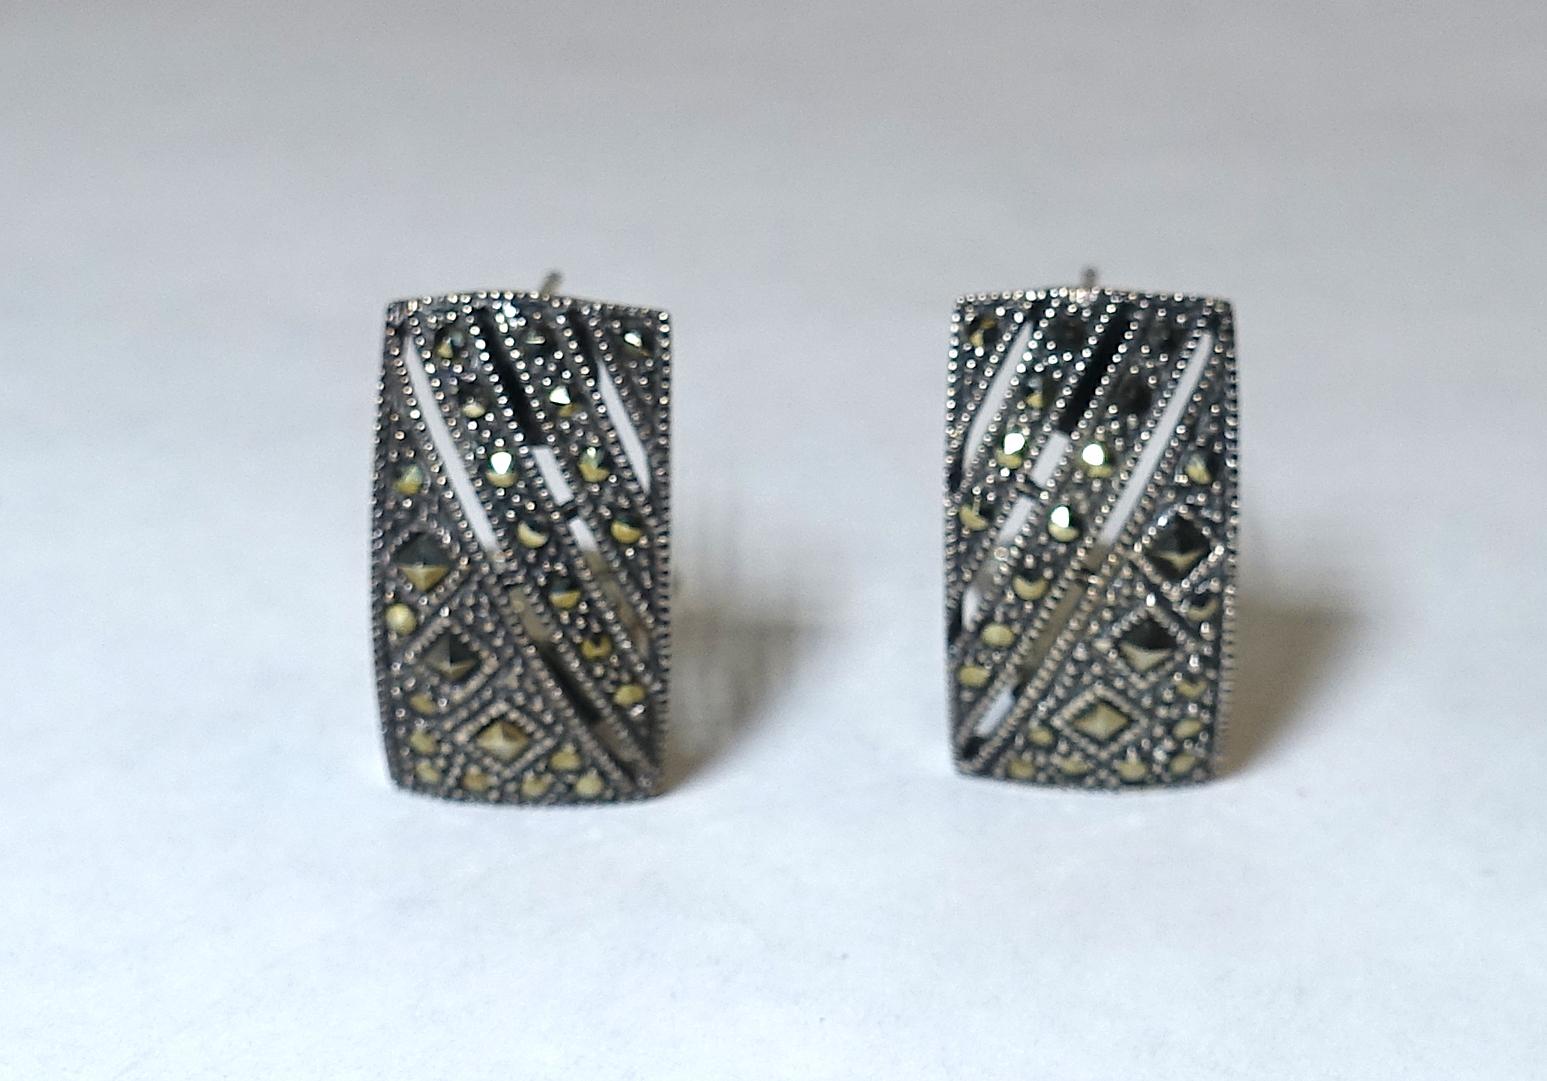 These vintage marcasite earrings have a simple but elegant design in sterling silver.  These pierced earrings measure 7/8” x 1/2” and are in excellent condition.